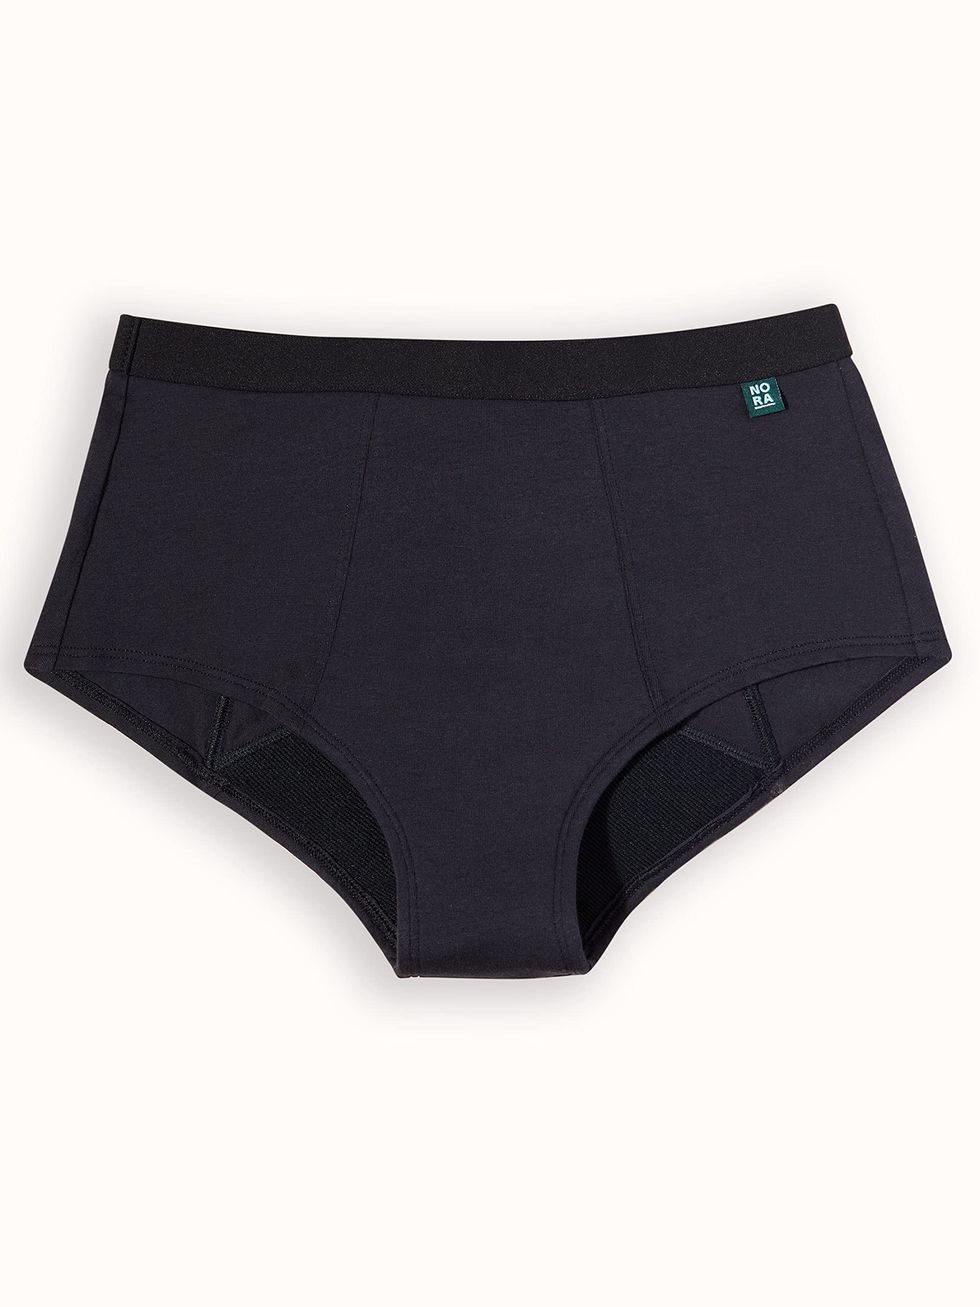 The Best Period Pants In The UK (PFAS Free) Tested & Reviewed